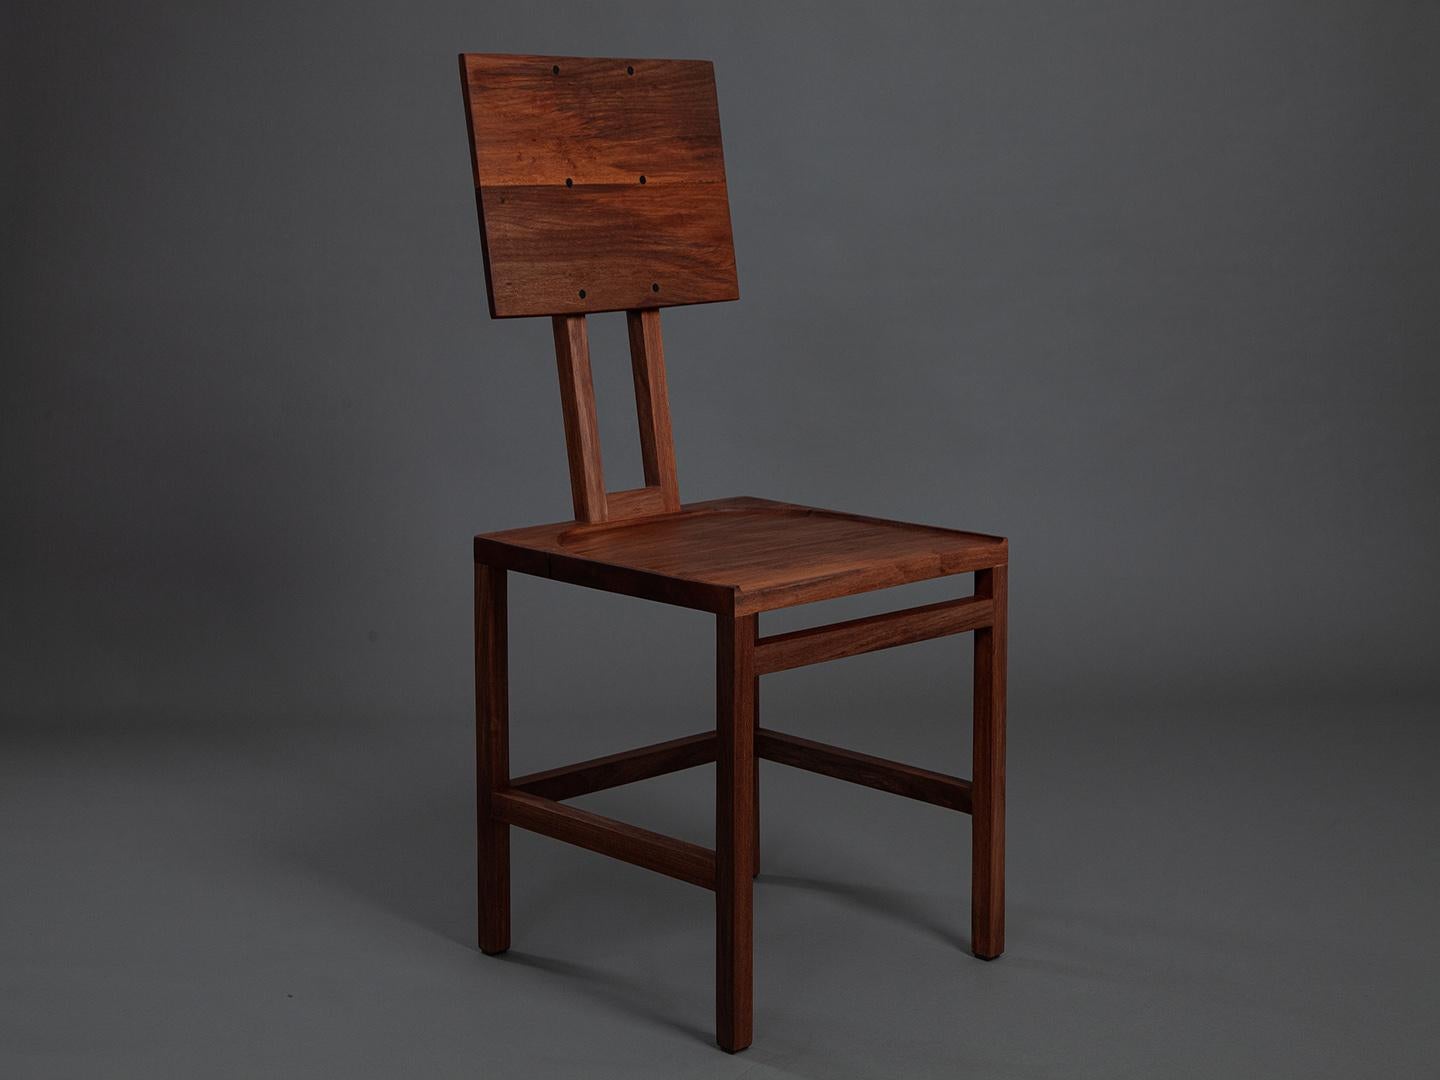 simple chair design wooden